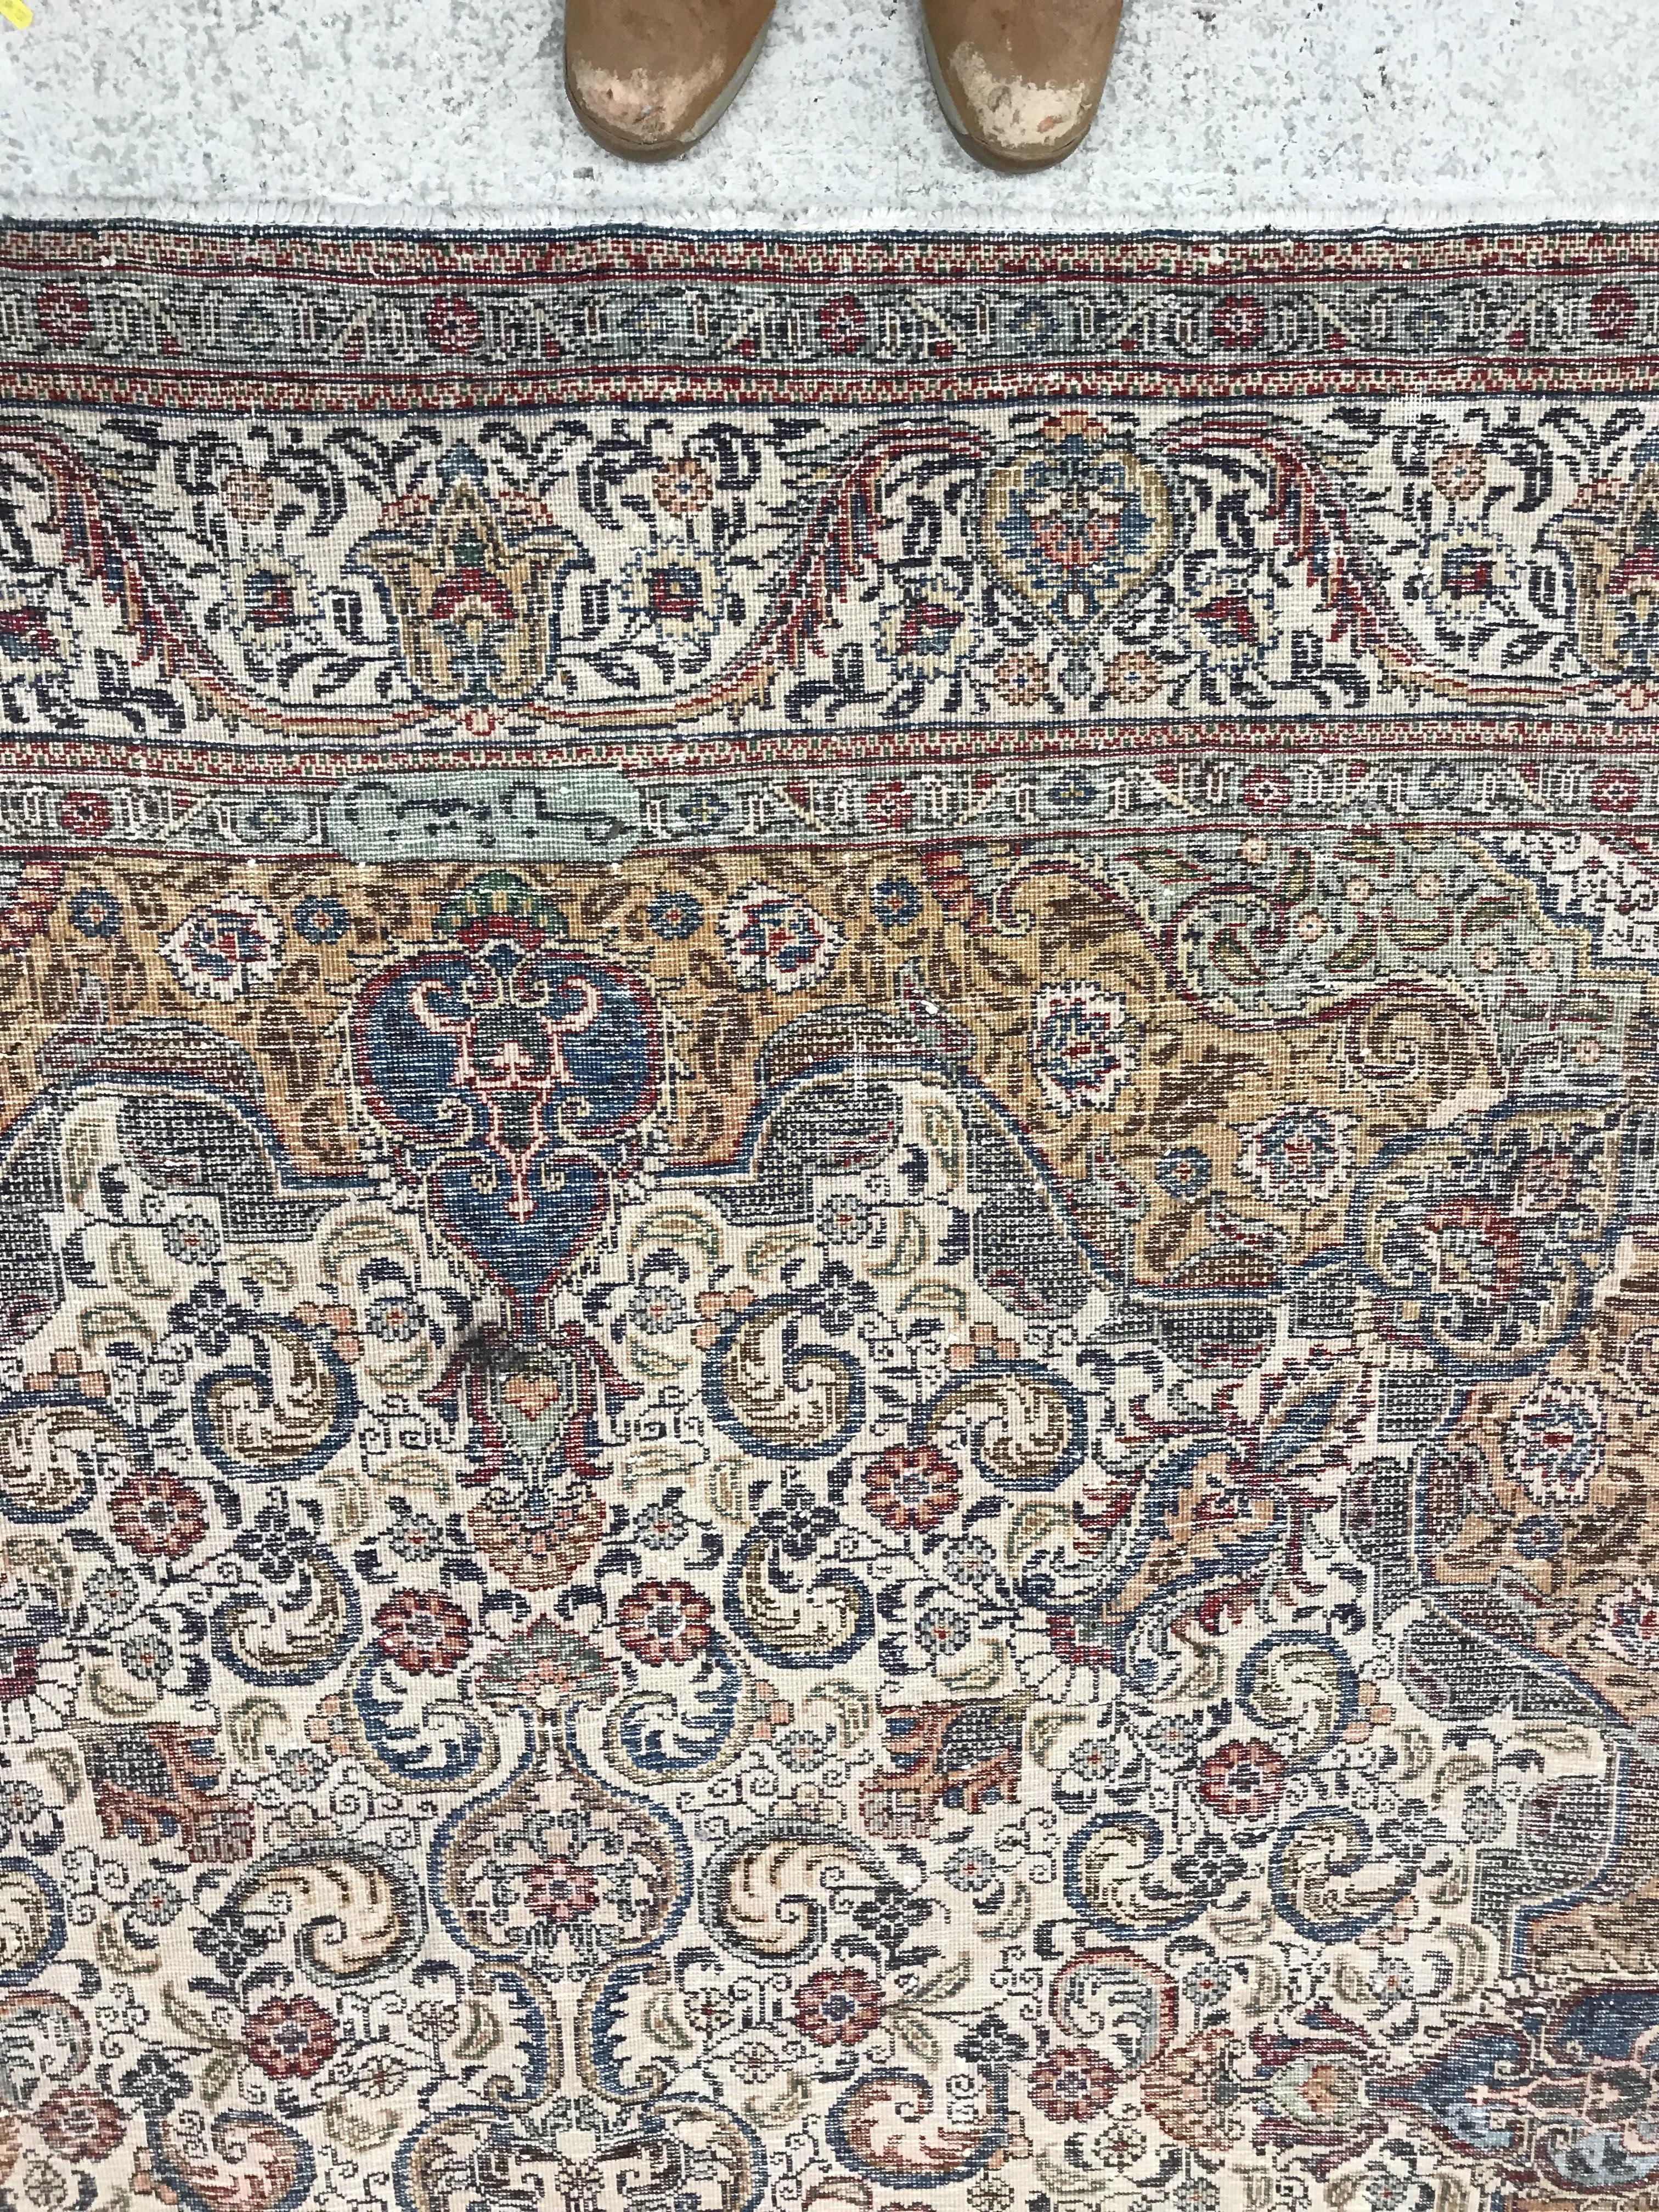 A Persian rug, - Image 23 of 38